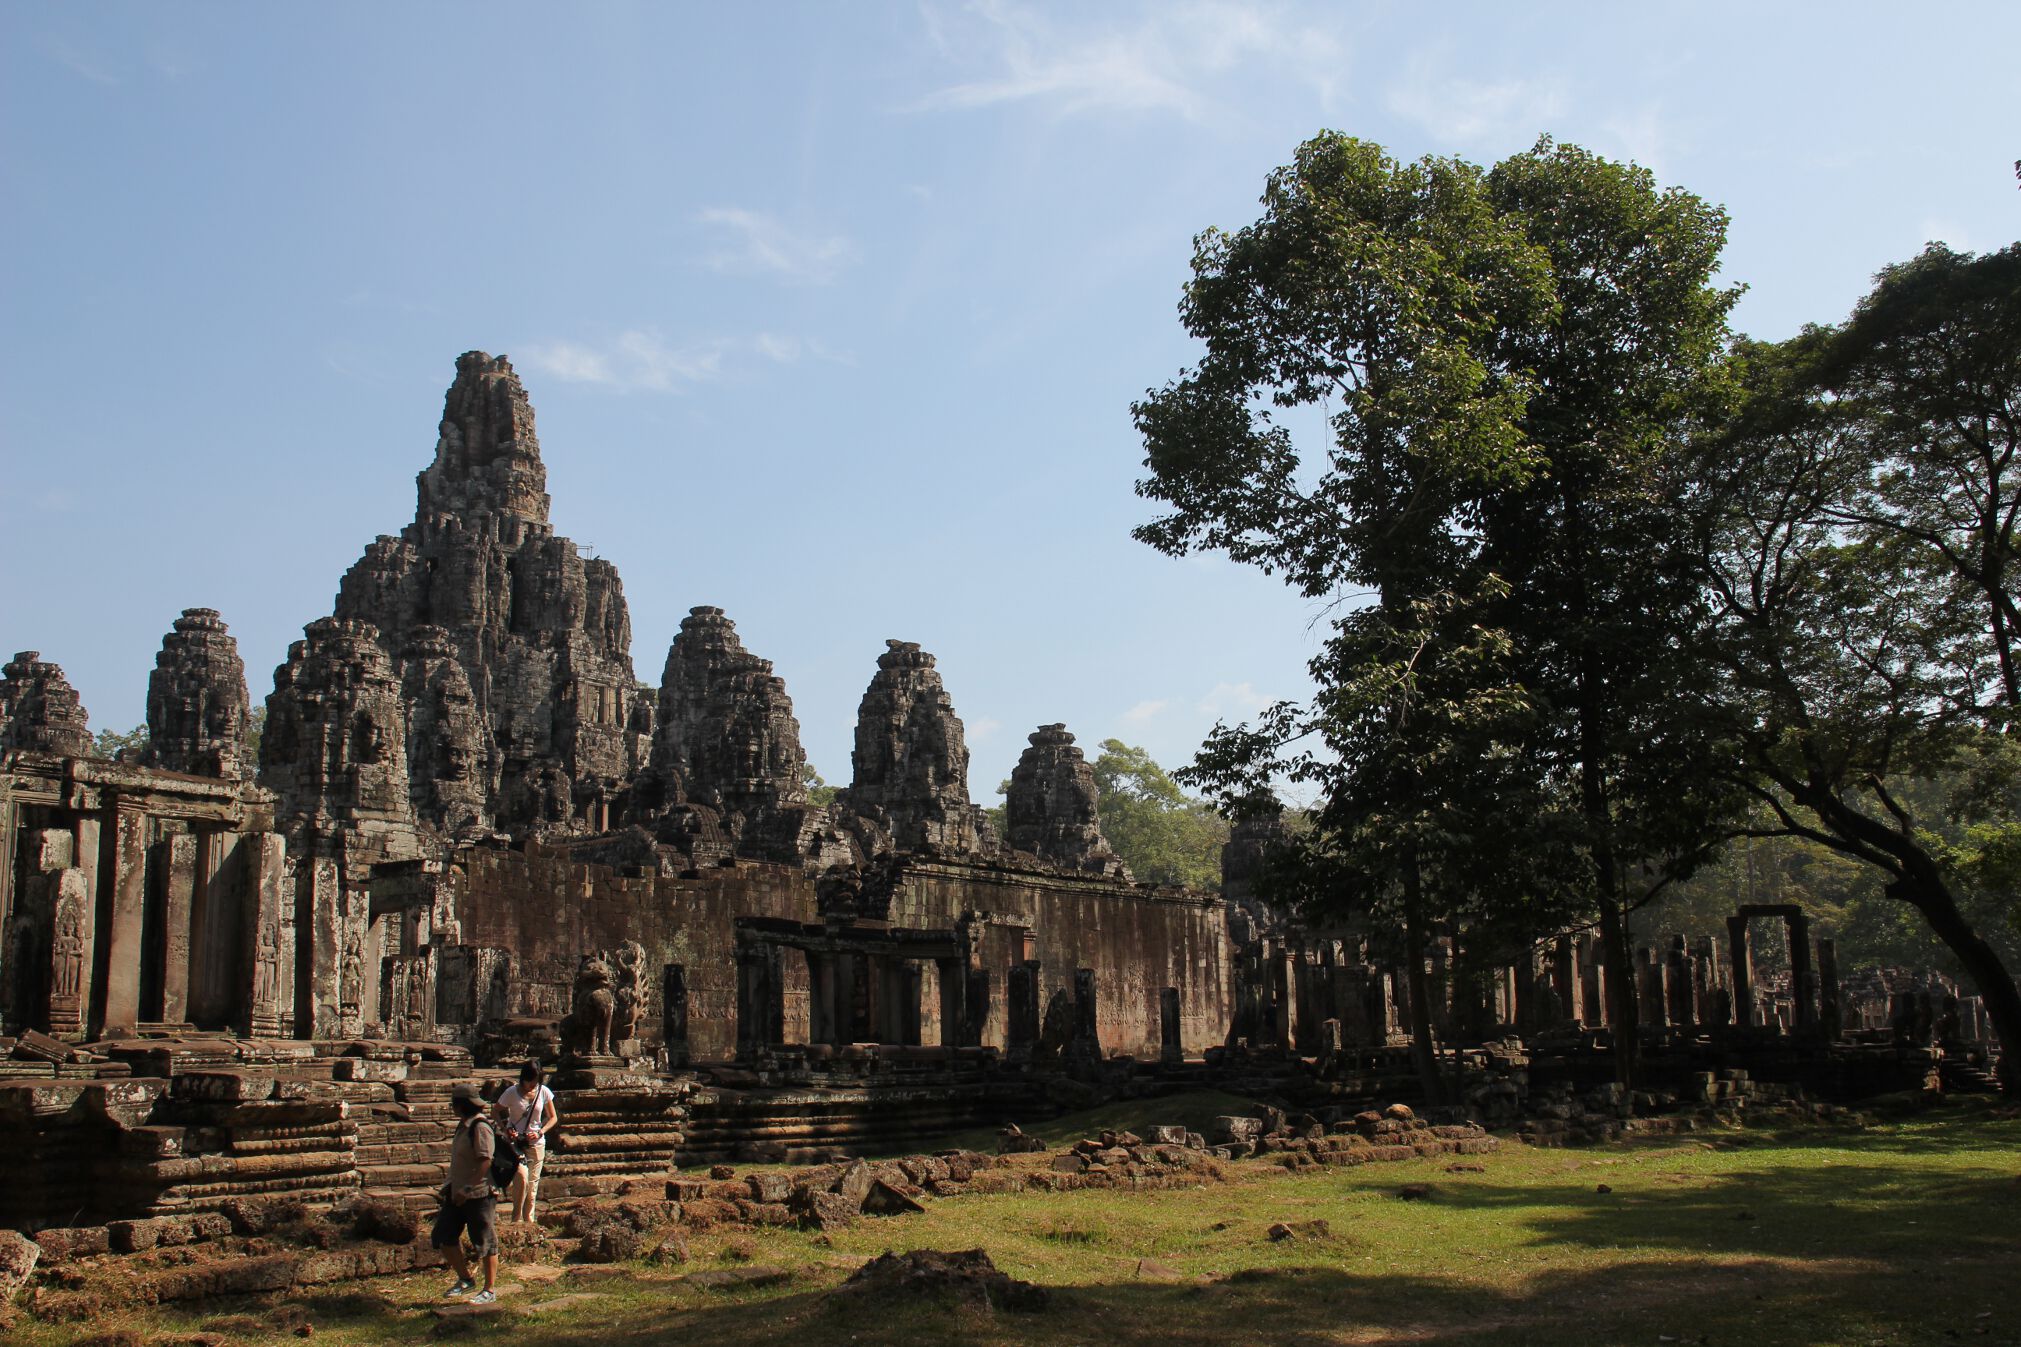 Hundreds of stone faces watch over visitors to the Bayon temple in Angkor Thom.